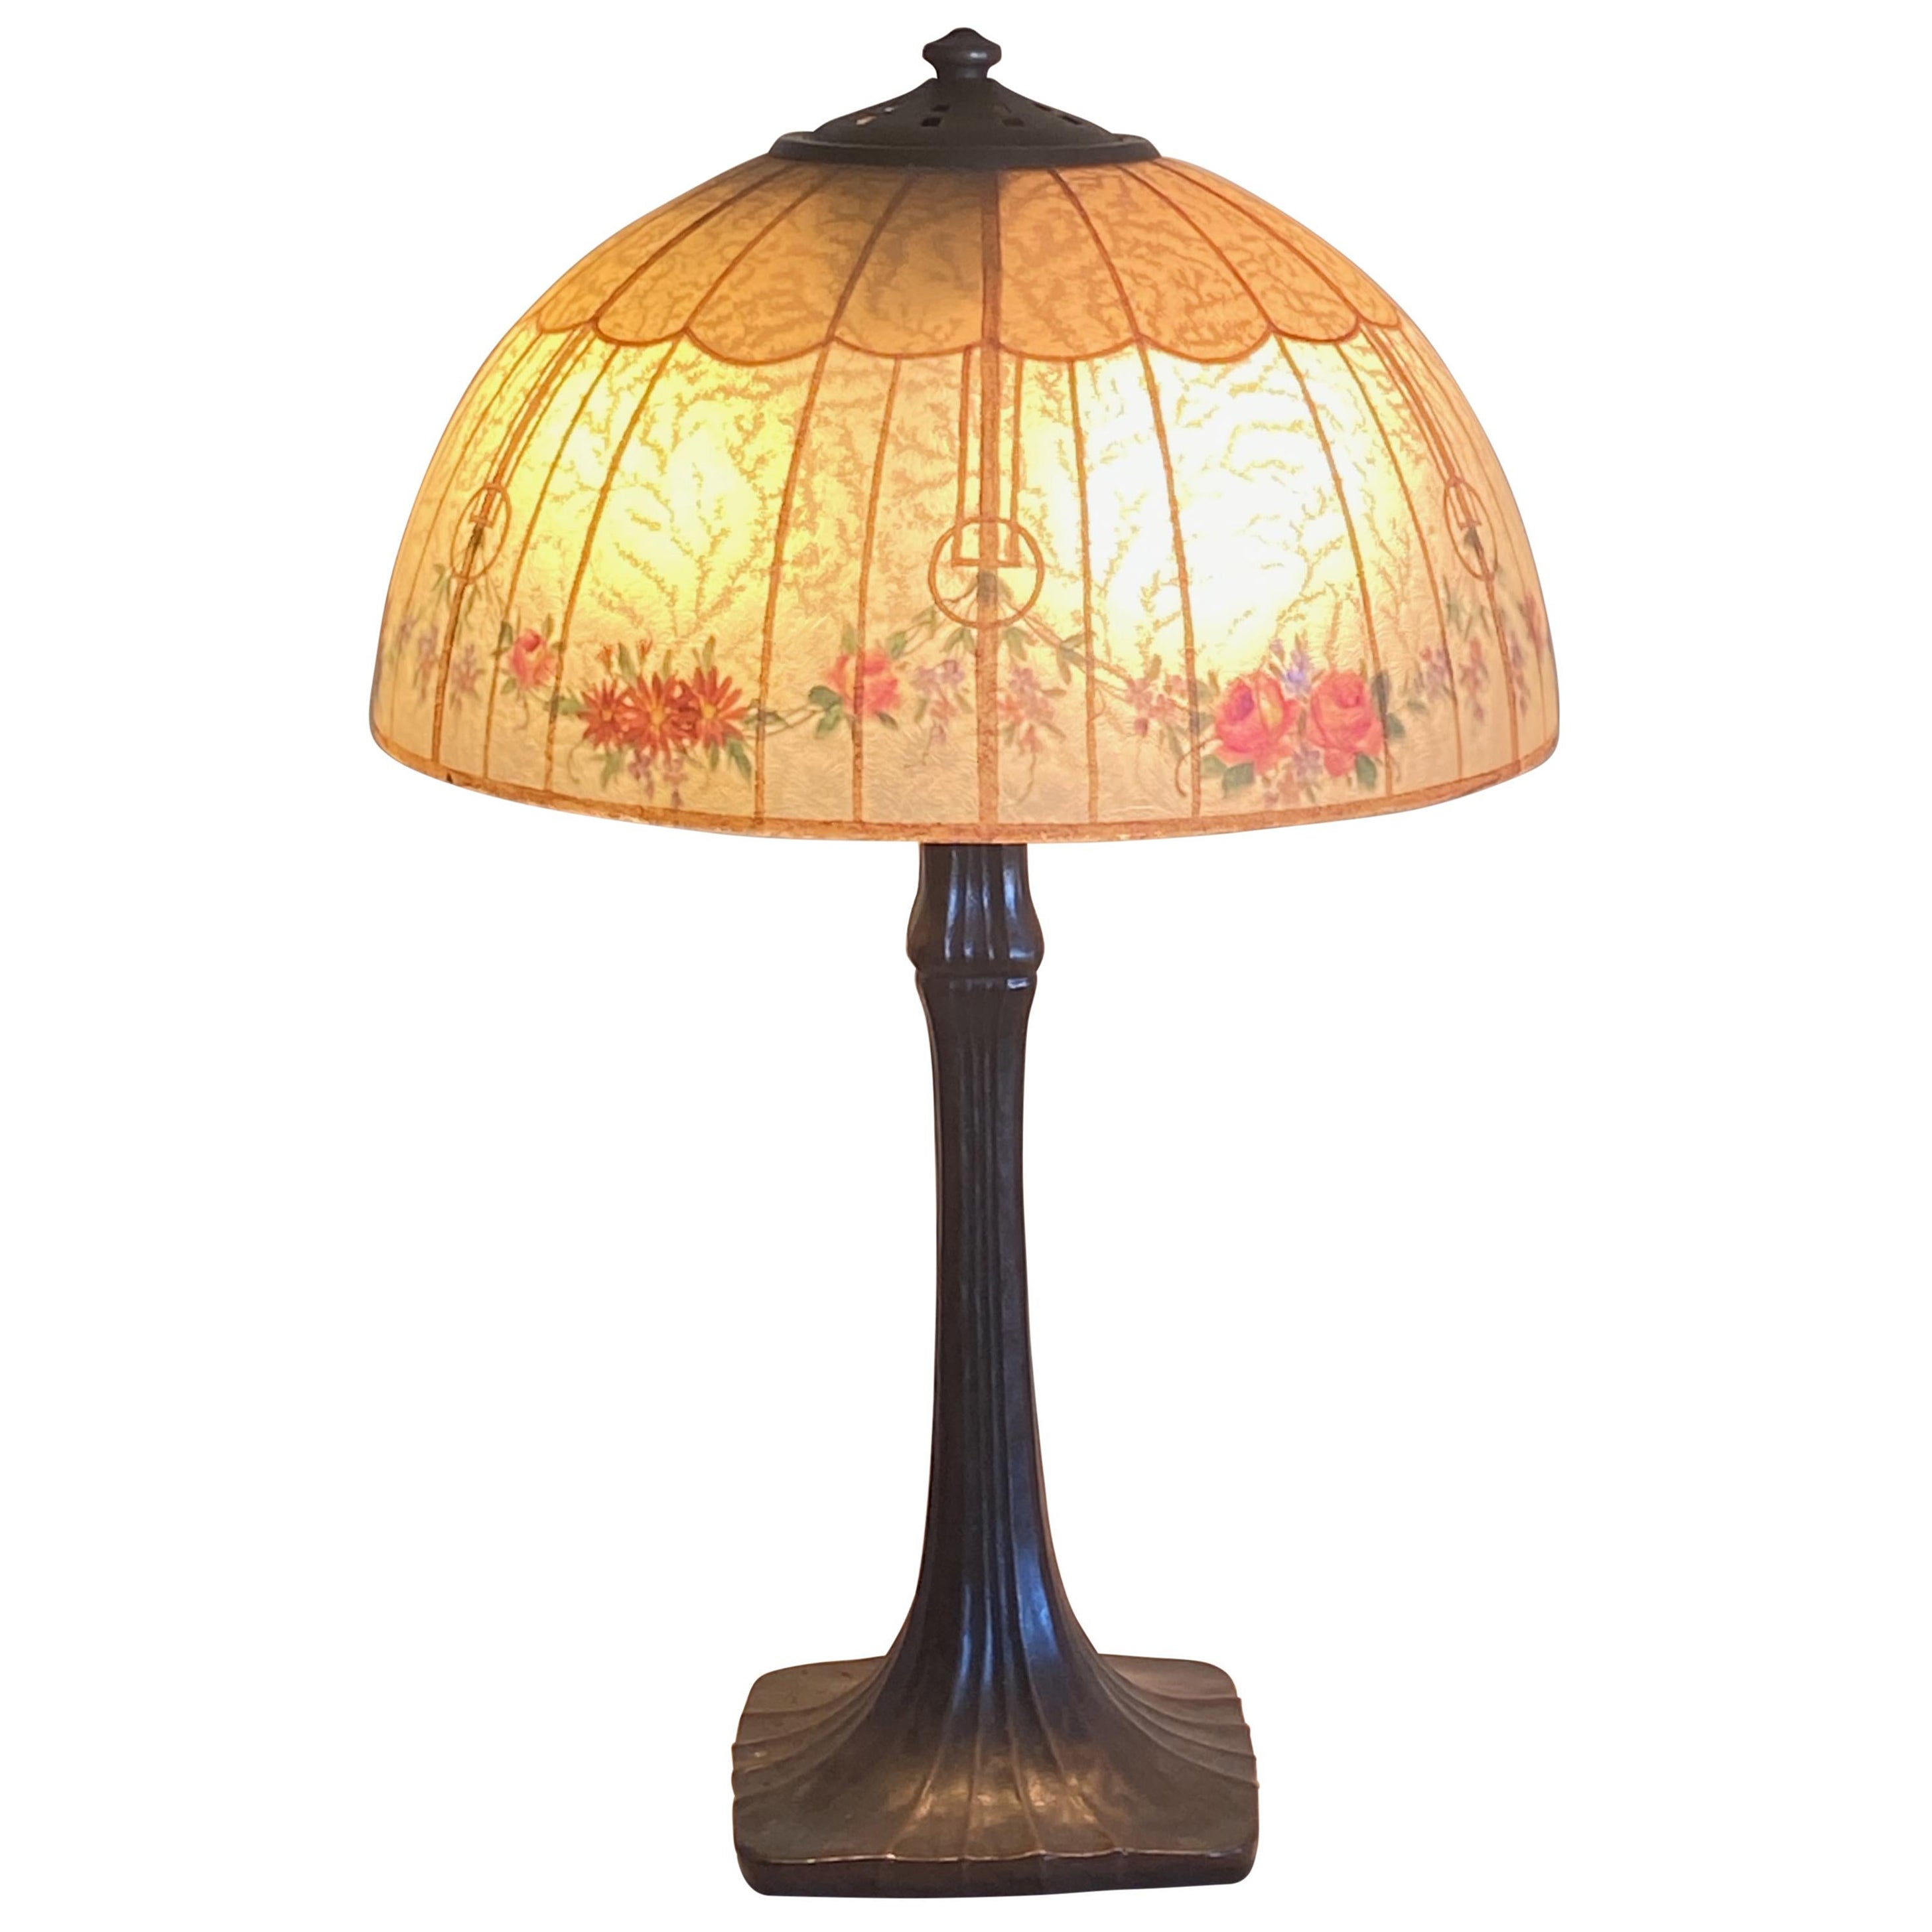 Antique Arts and Crafts Era Handel Lamp with Hand Painted Shade Circa 1910 